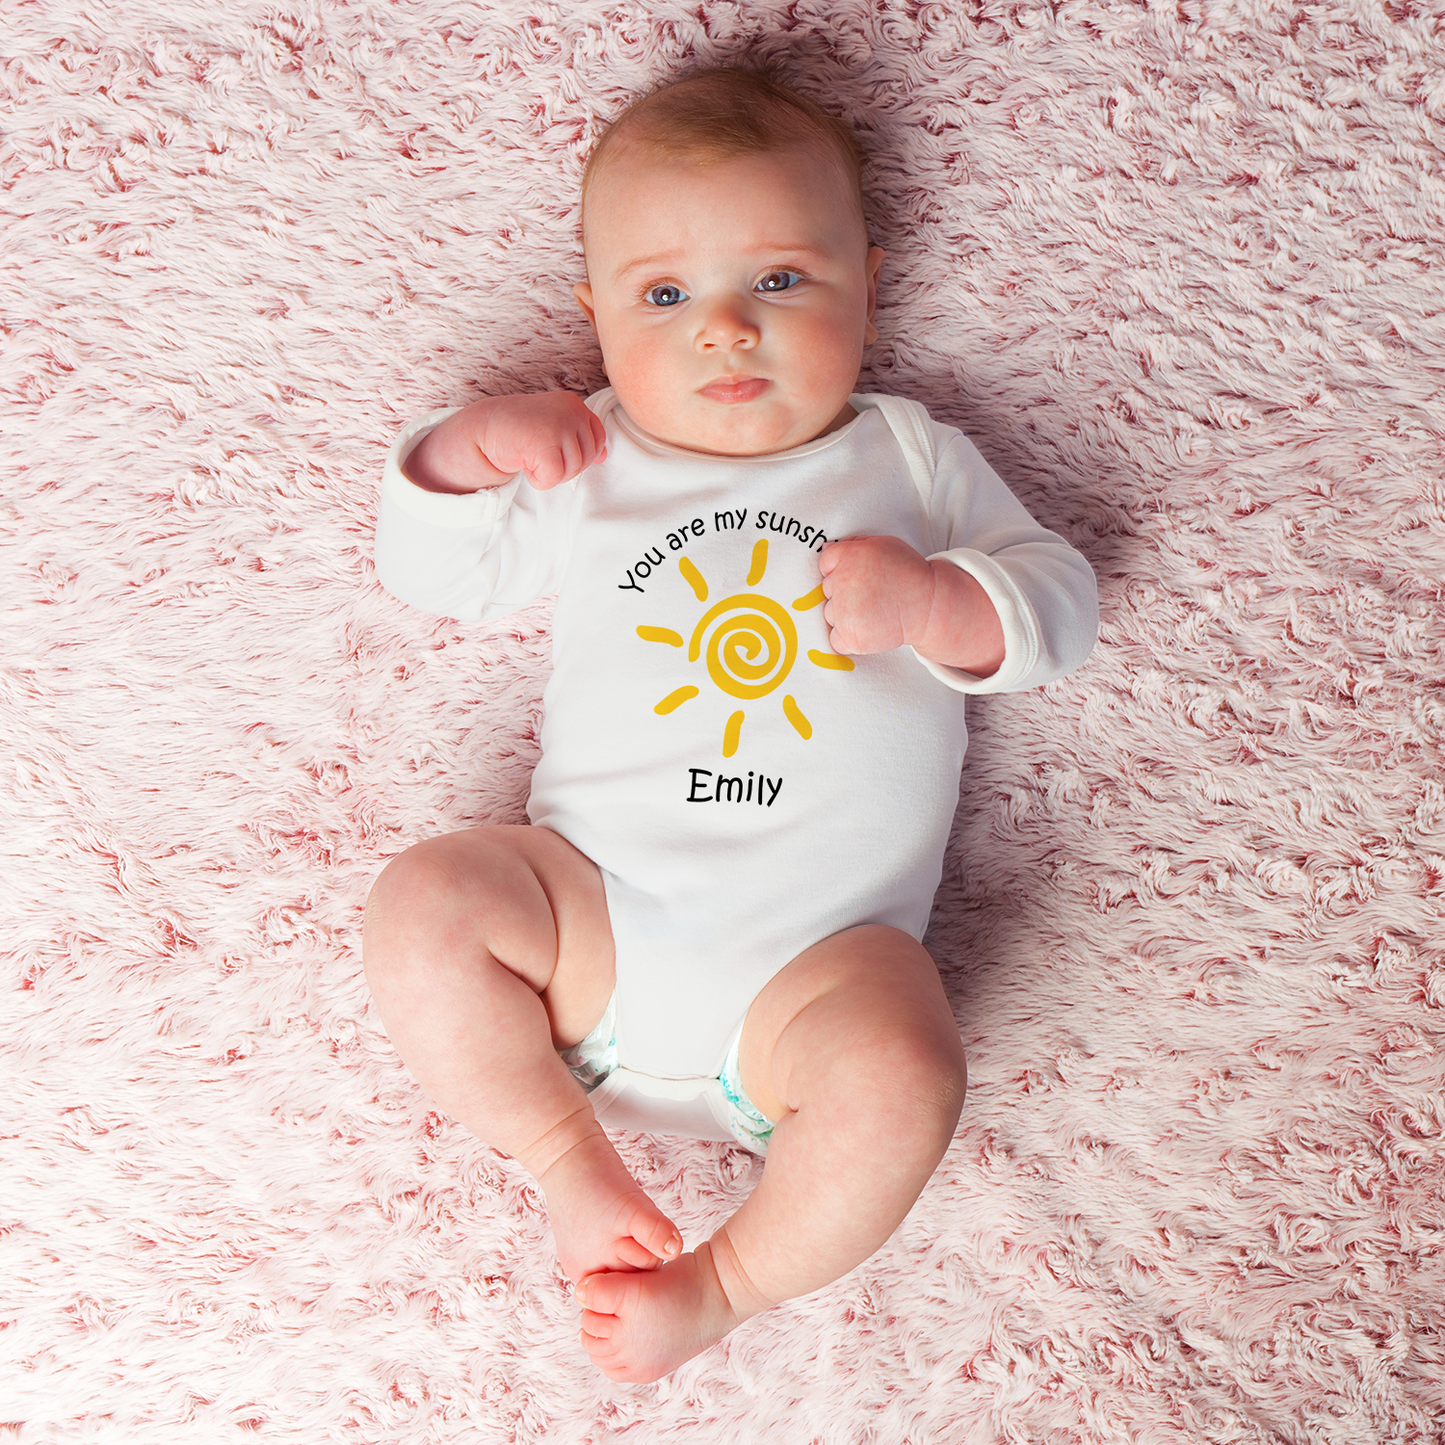 [Personalized]  Endanzoo Organic Baby Bodysuit - You are my Sunshine